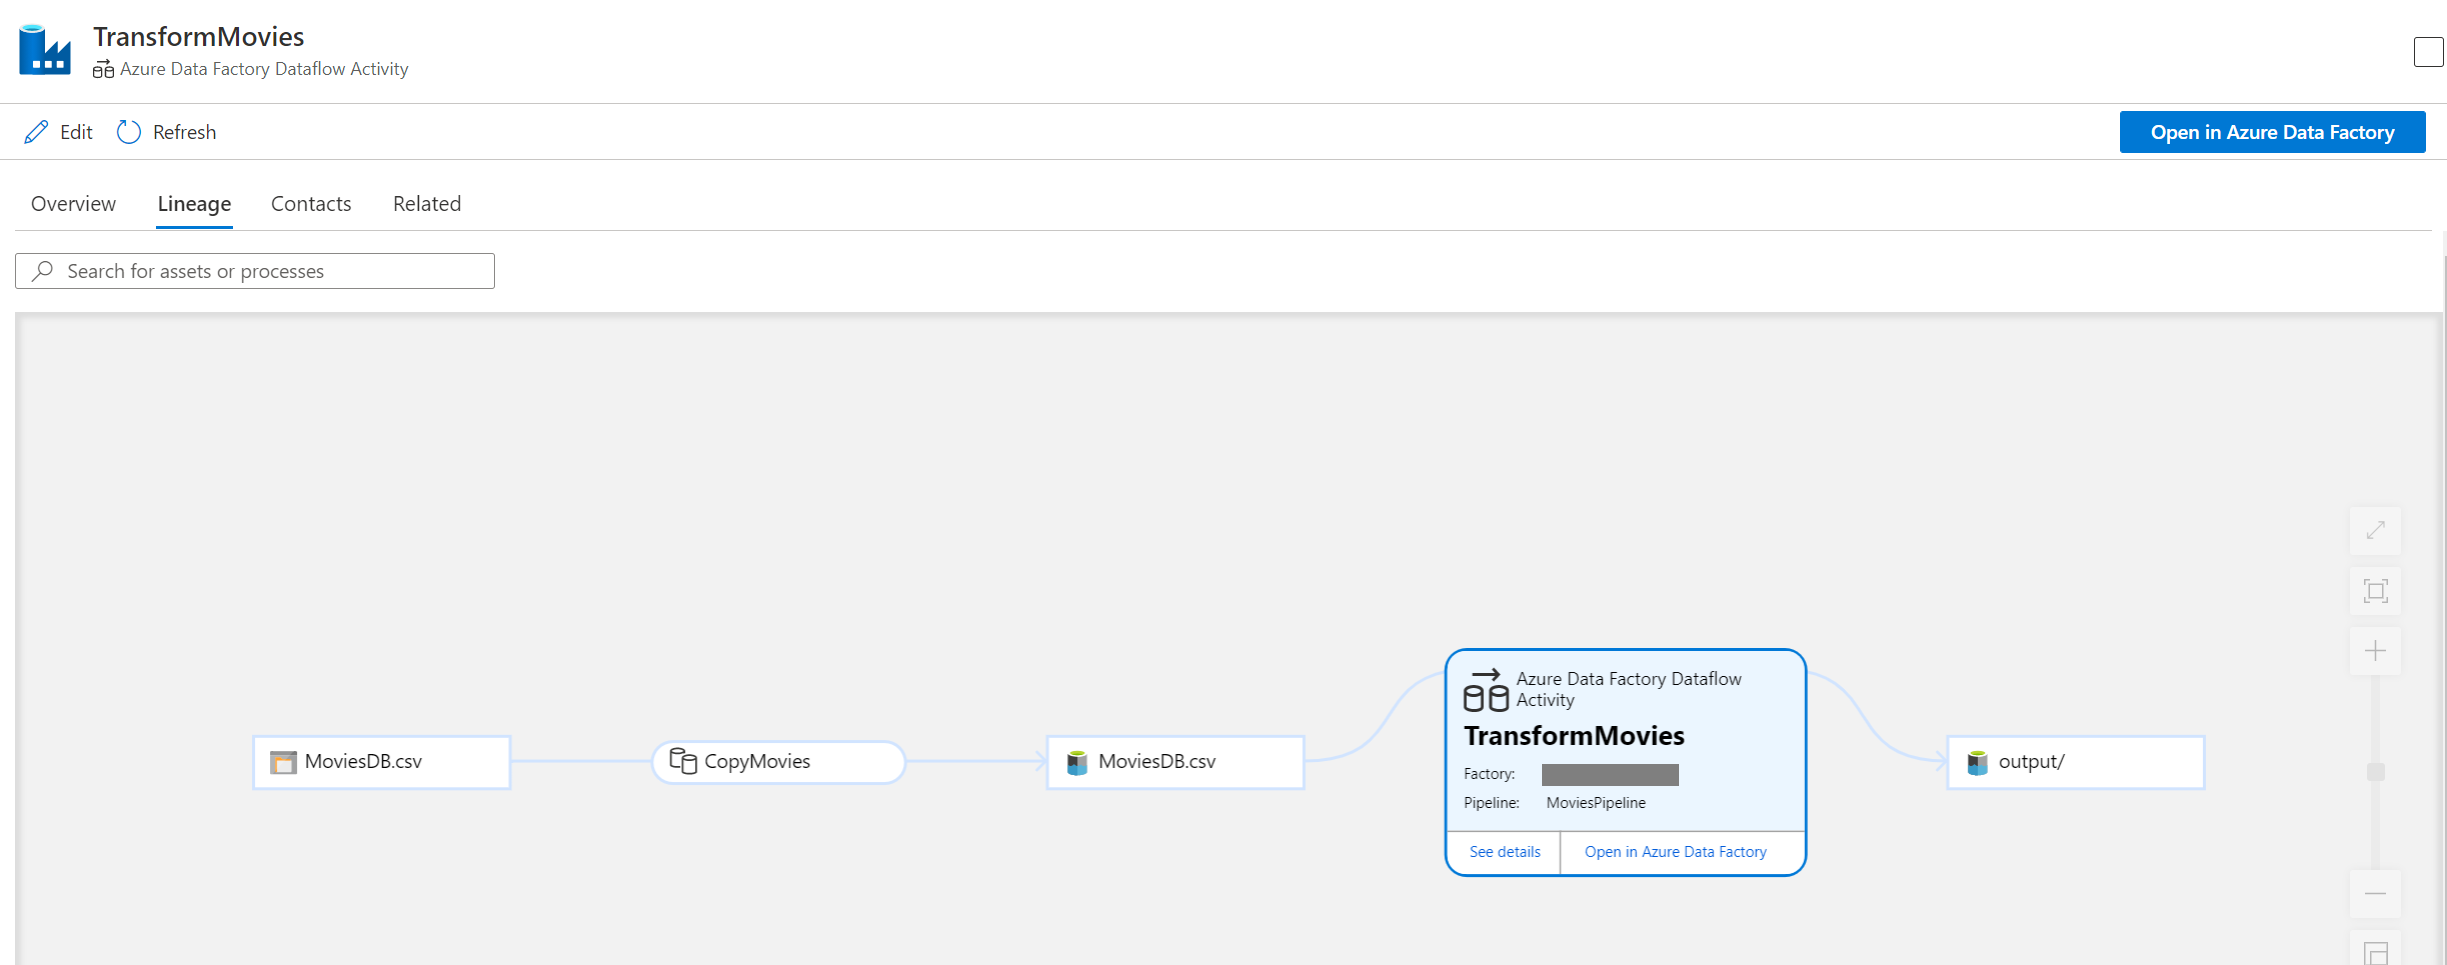 Screenshot of the Data Flow lineage in Microsoft Purview.